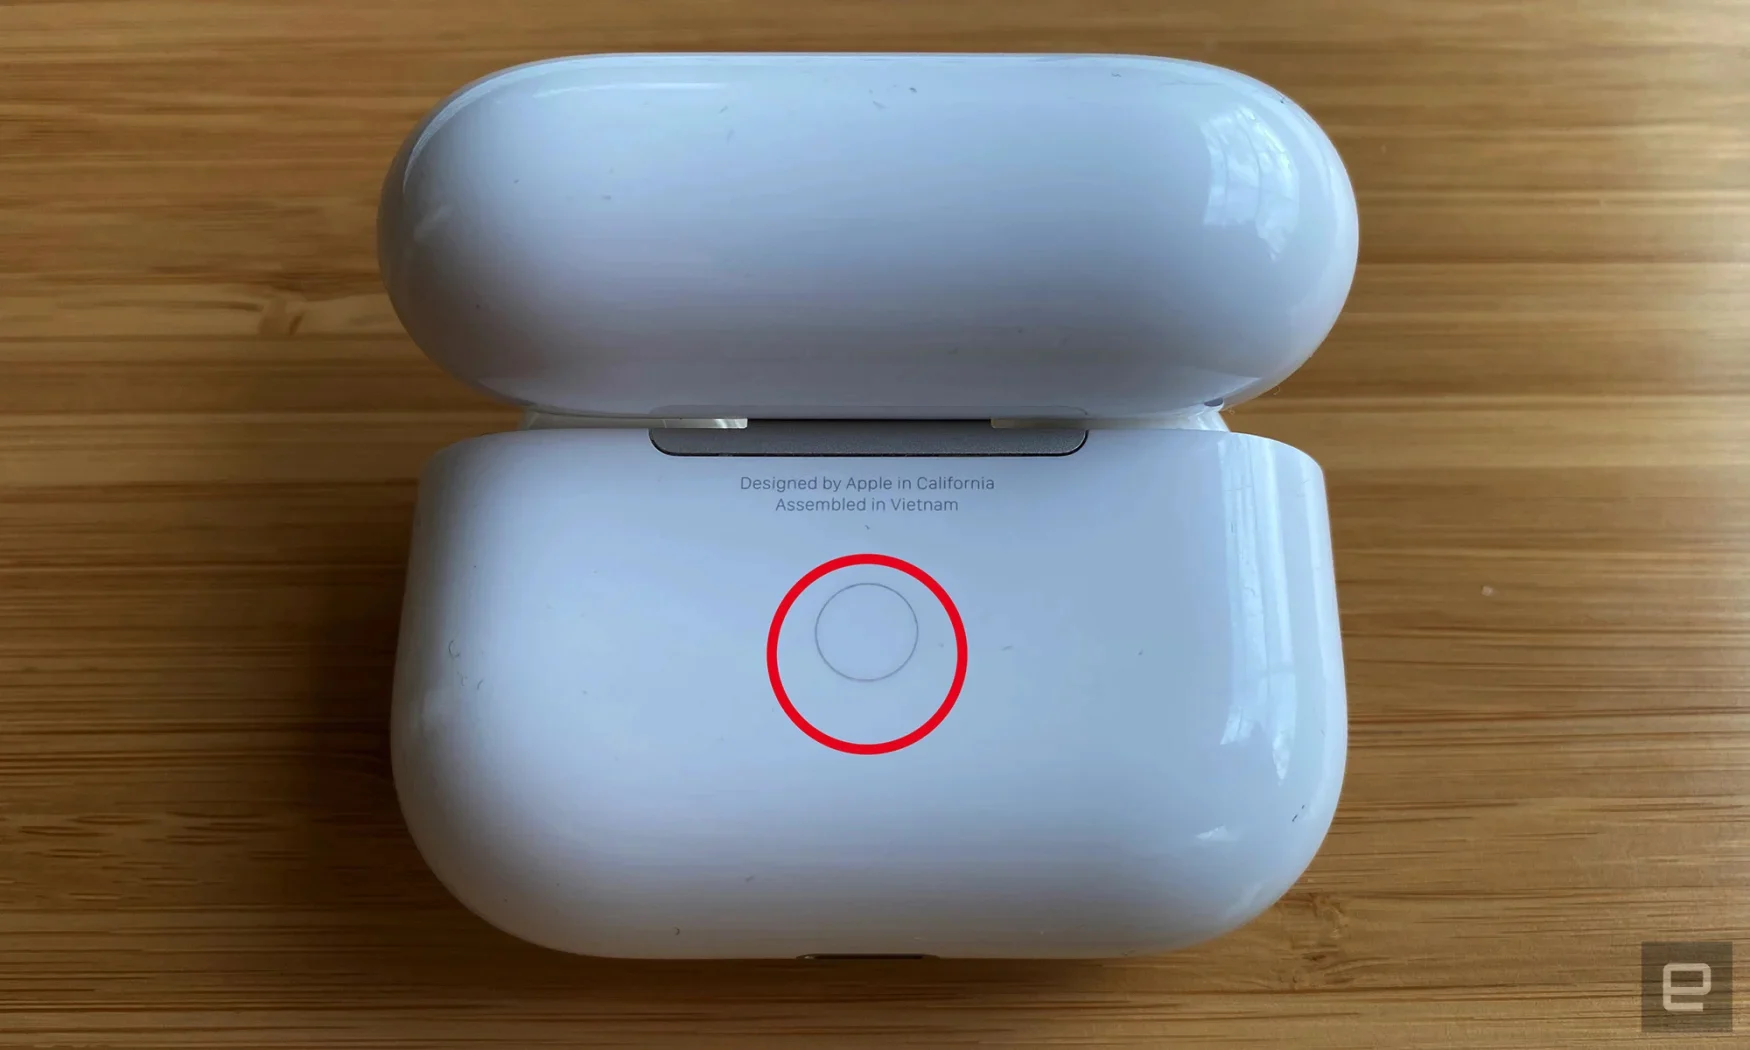 A closeup image of the back of an AirPods case with a red circle around the back button used for pairing with other devices. 